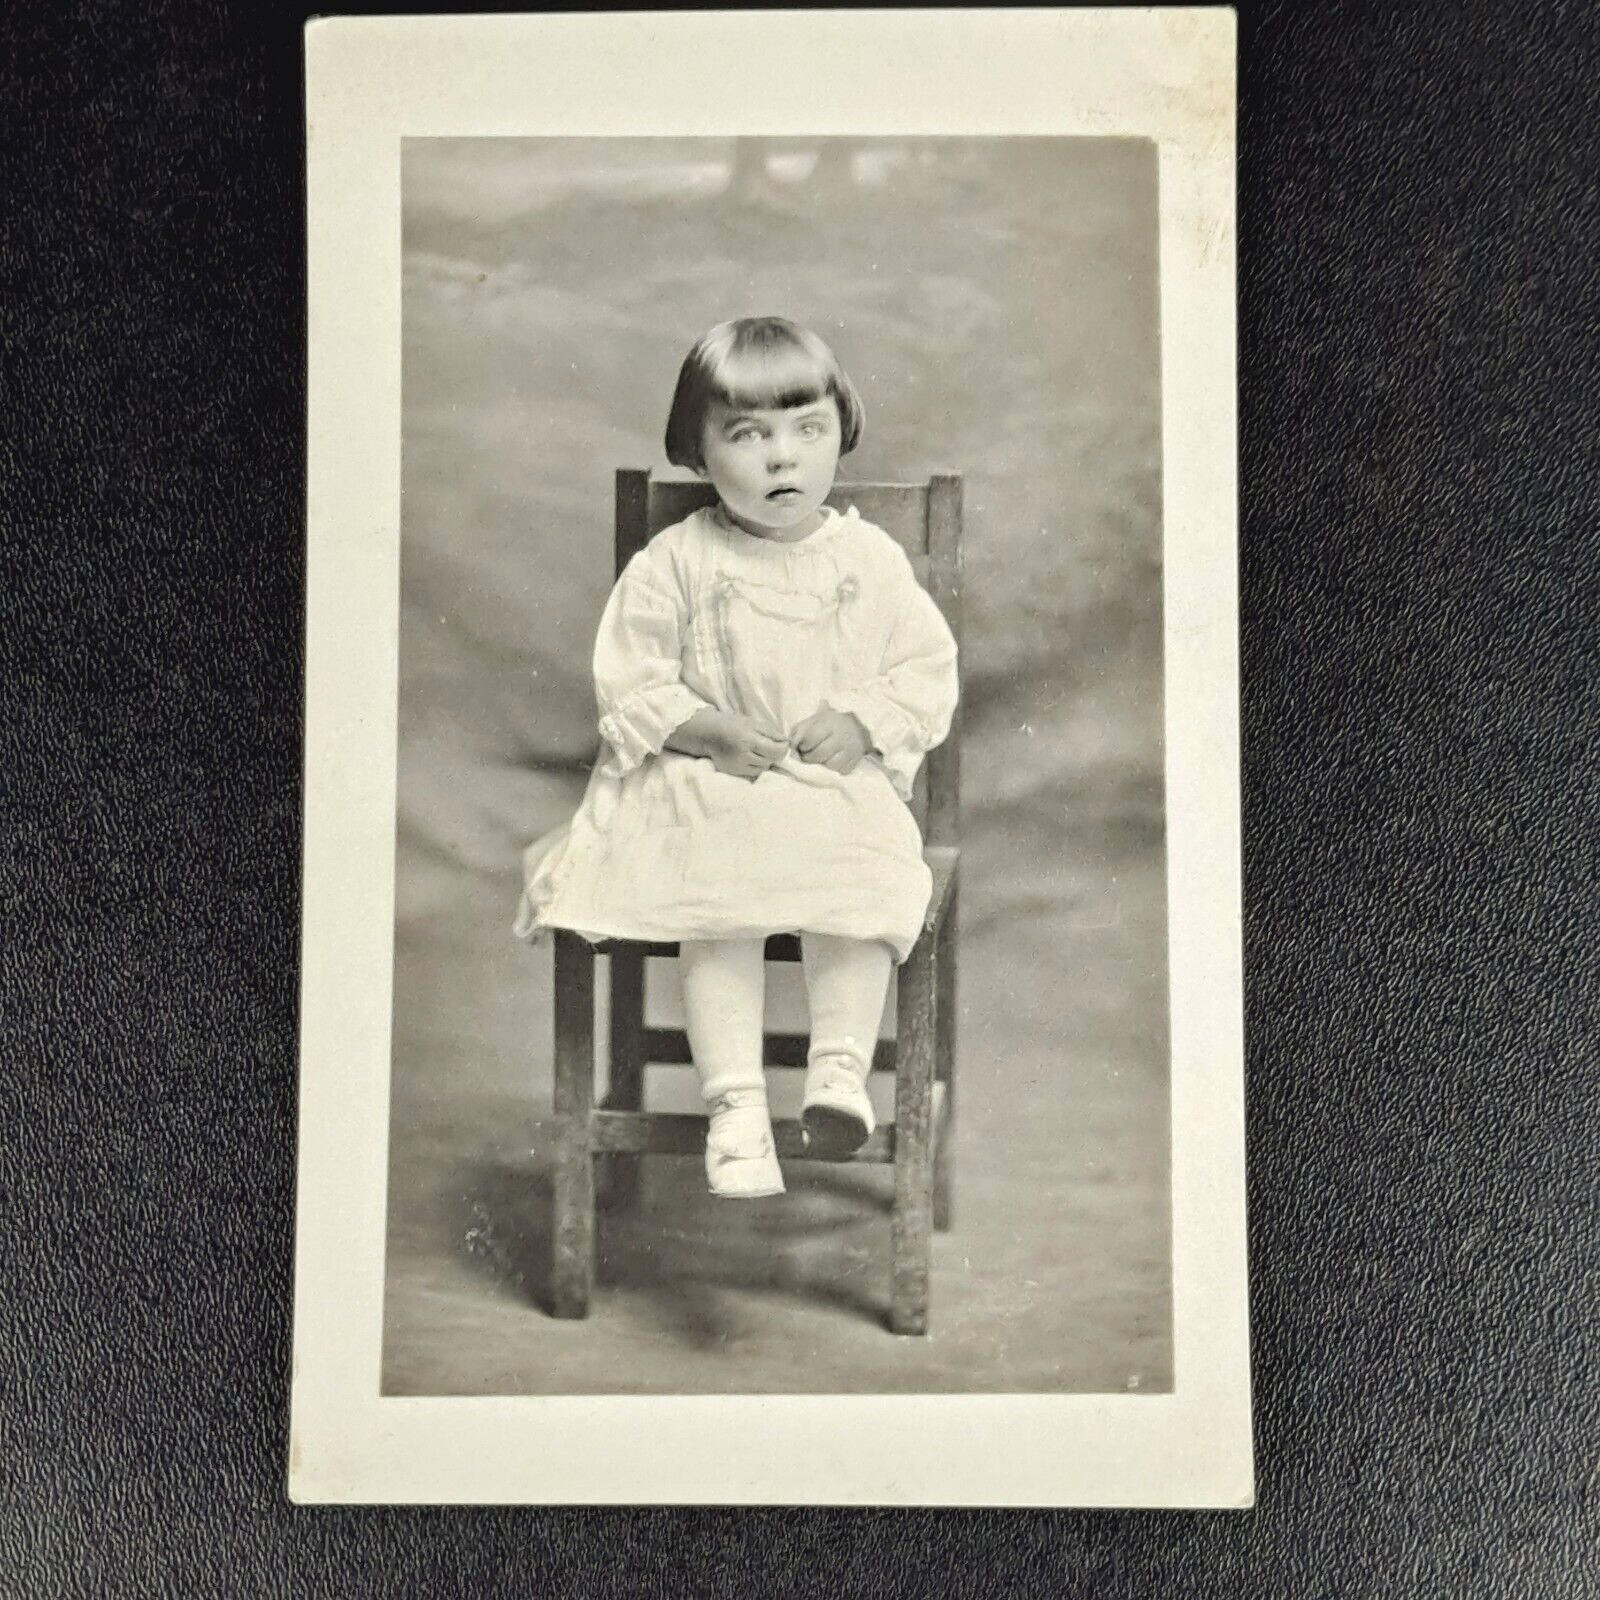 ANTIQUE WW1-ERA REAL PHOTO POST CARD OF LITTLE GIRL RPPC POSTCARD - UNPOSTED